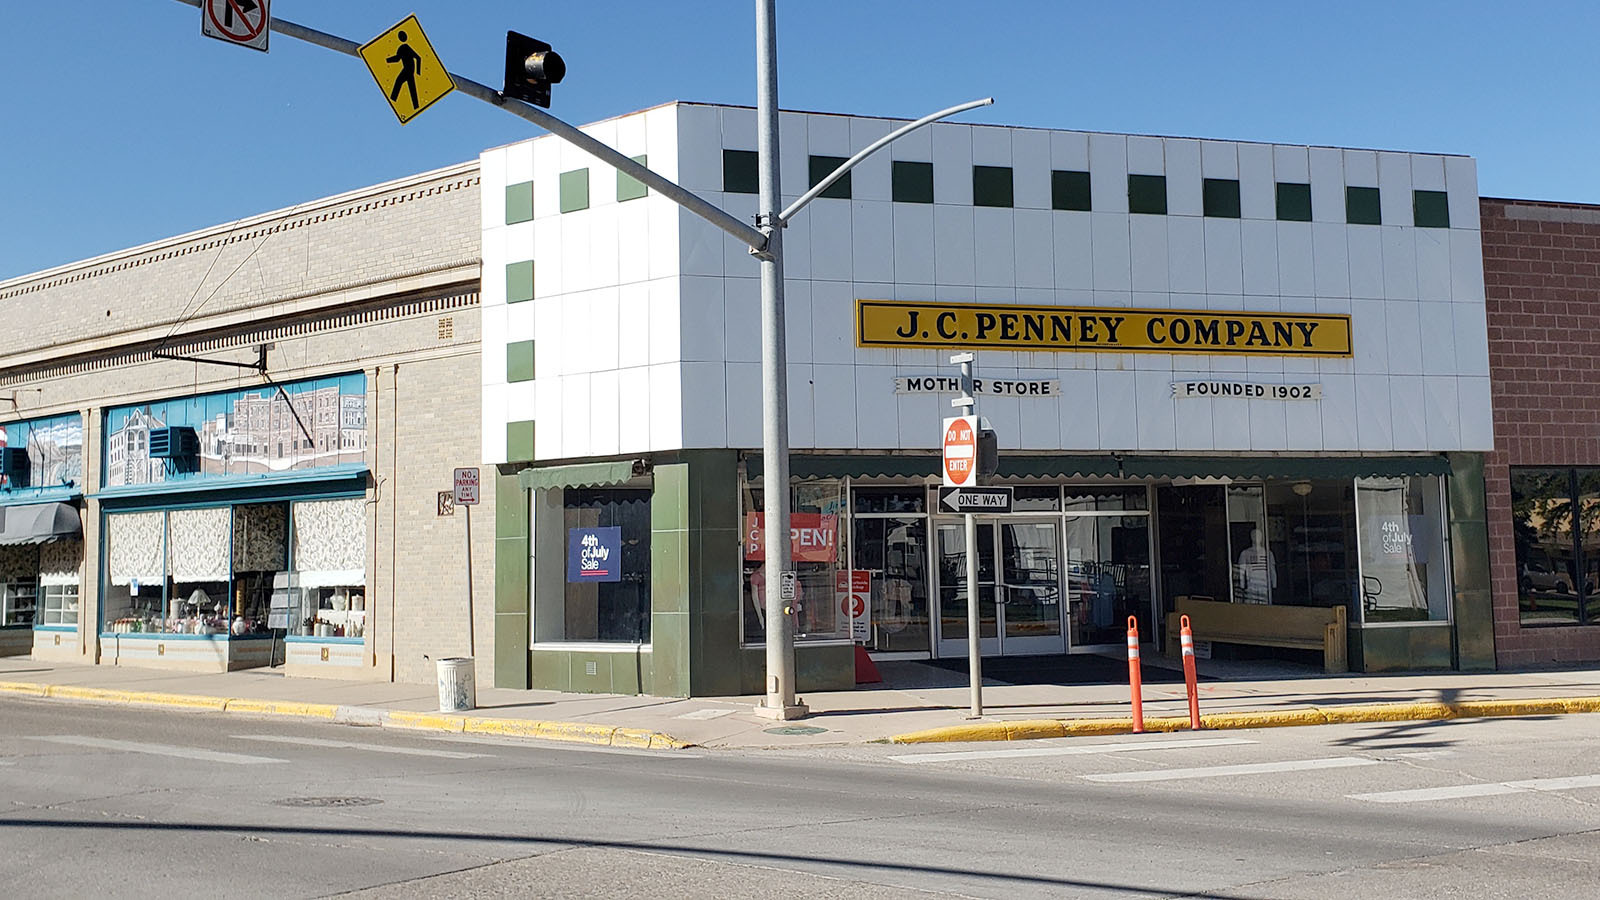 JCPenney's 'Mother Store' In Kemmerer, Wyoming, Is Still A Small